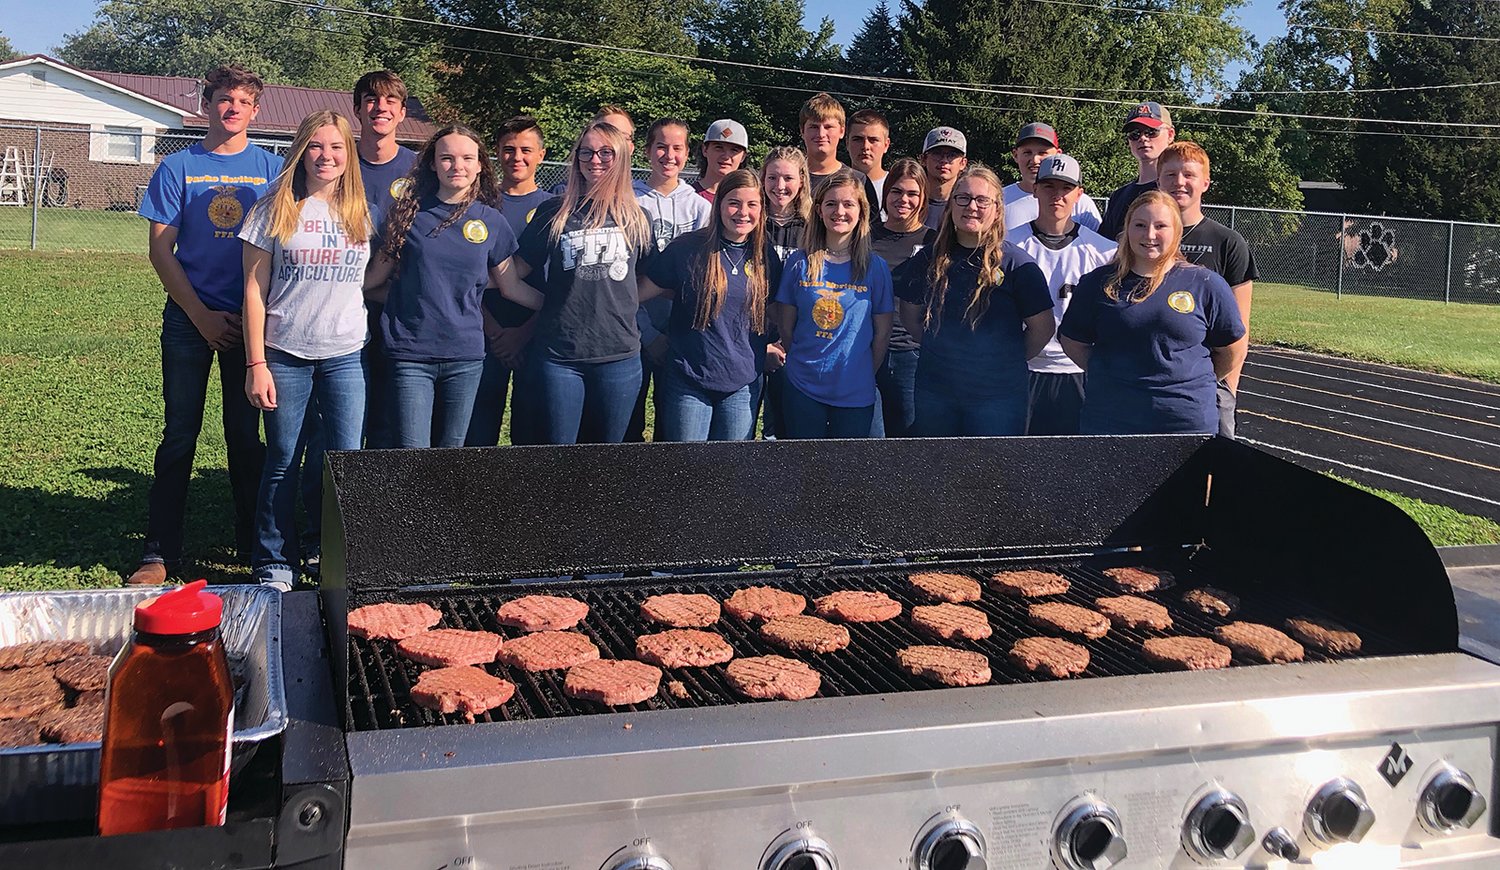 Parke Heritage High School FFA members participated in the Feed A Farmer event Oct.  1. Members prepared meals of hamburgers, cole slaw, chips and a cookie for area farmers and agricultural businesses. This is a way for FFA members to thank our local farmers and businesses for all they do for our community.  Members participating in the FFA Feed A Farmer are front- Stormy Swaim, Hailey Liebrandt, Emma Norman, Keely Black, Madison Coleman, Nichole Pezan and Catrina Roberts; second row- Mason Bowsher, Drew Brown, Carson Rolison, JD Seward, Carly Harpold, Shelby Woods, Jasmyne Everson, Aiden Batty and Mason McVay; back- Logan Hammontree, Sutton Ramsay, Hunter McDaniel, Parker Grayless, Brayton Myers and Ryan Mathis. Not pictured are Lilie Mace and Ashlee Clodfelter.